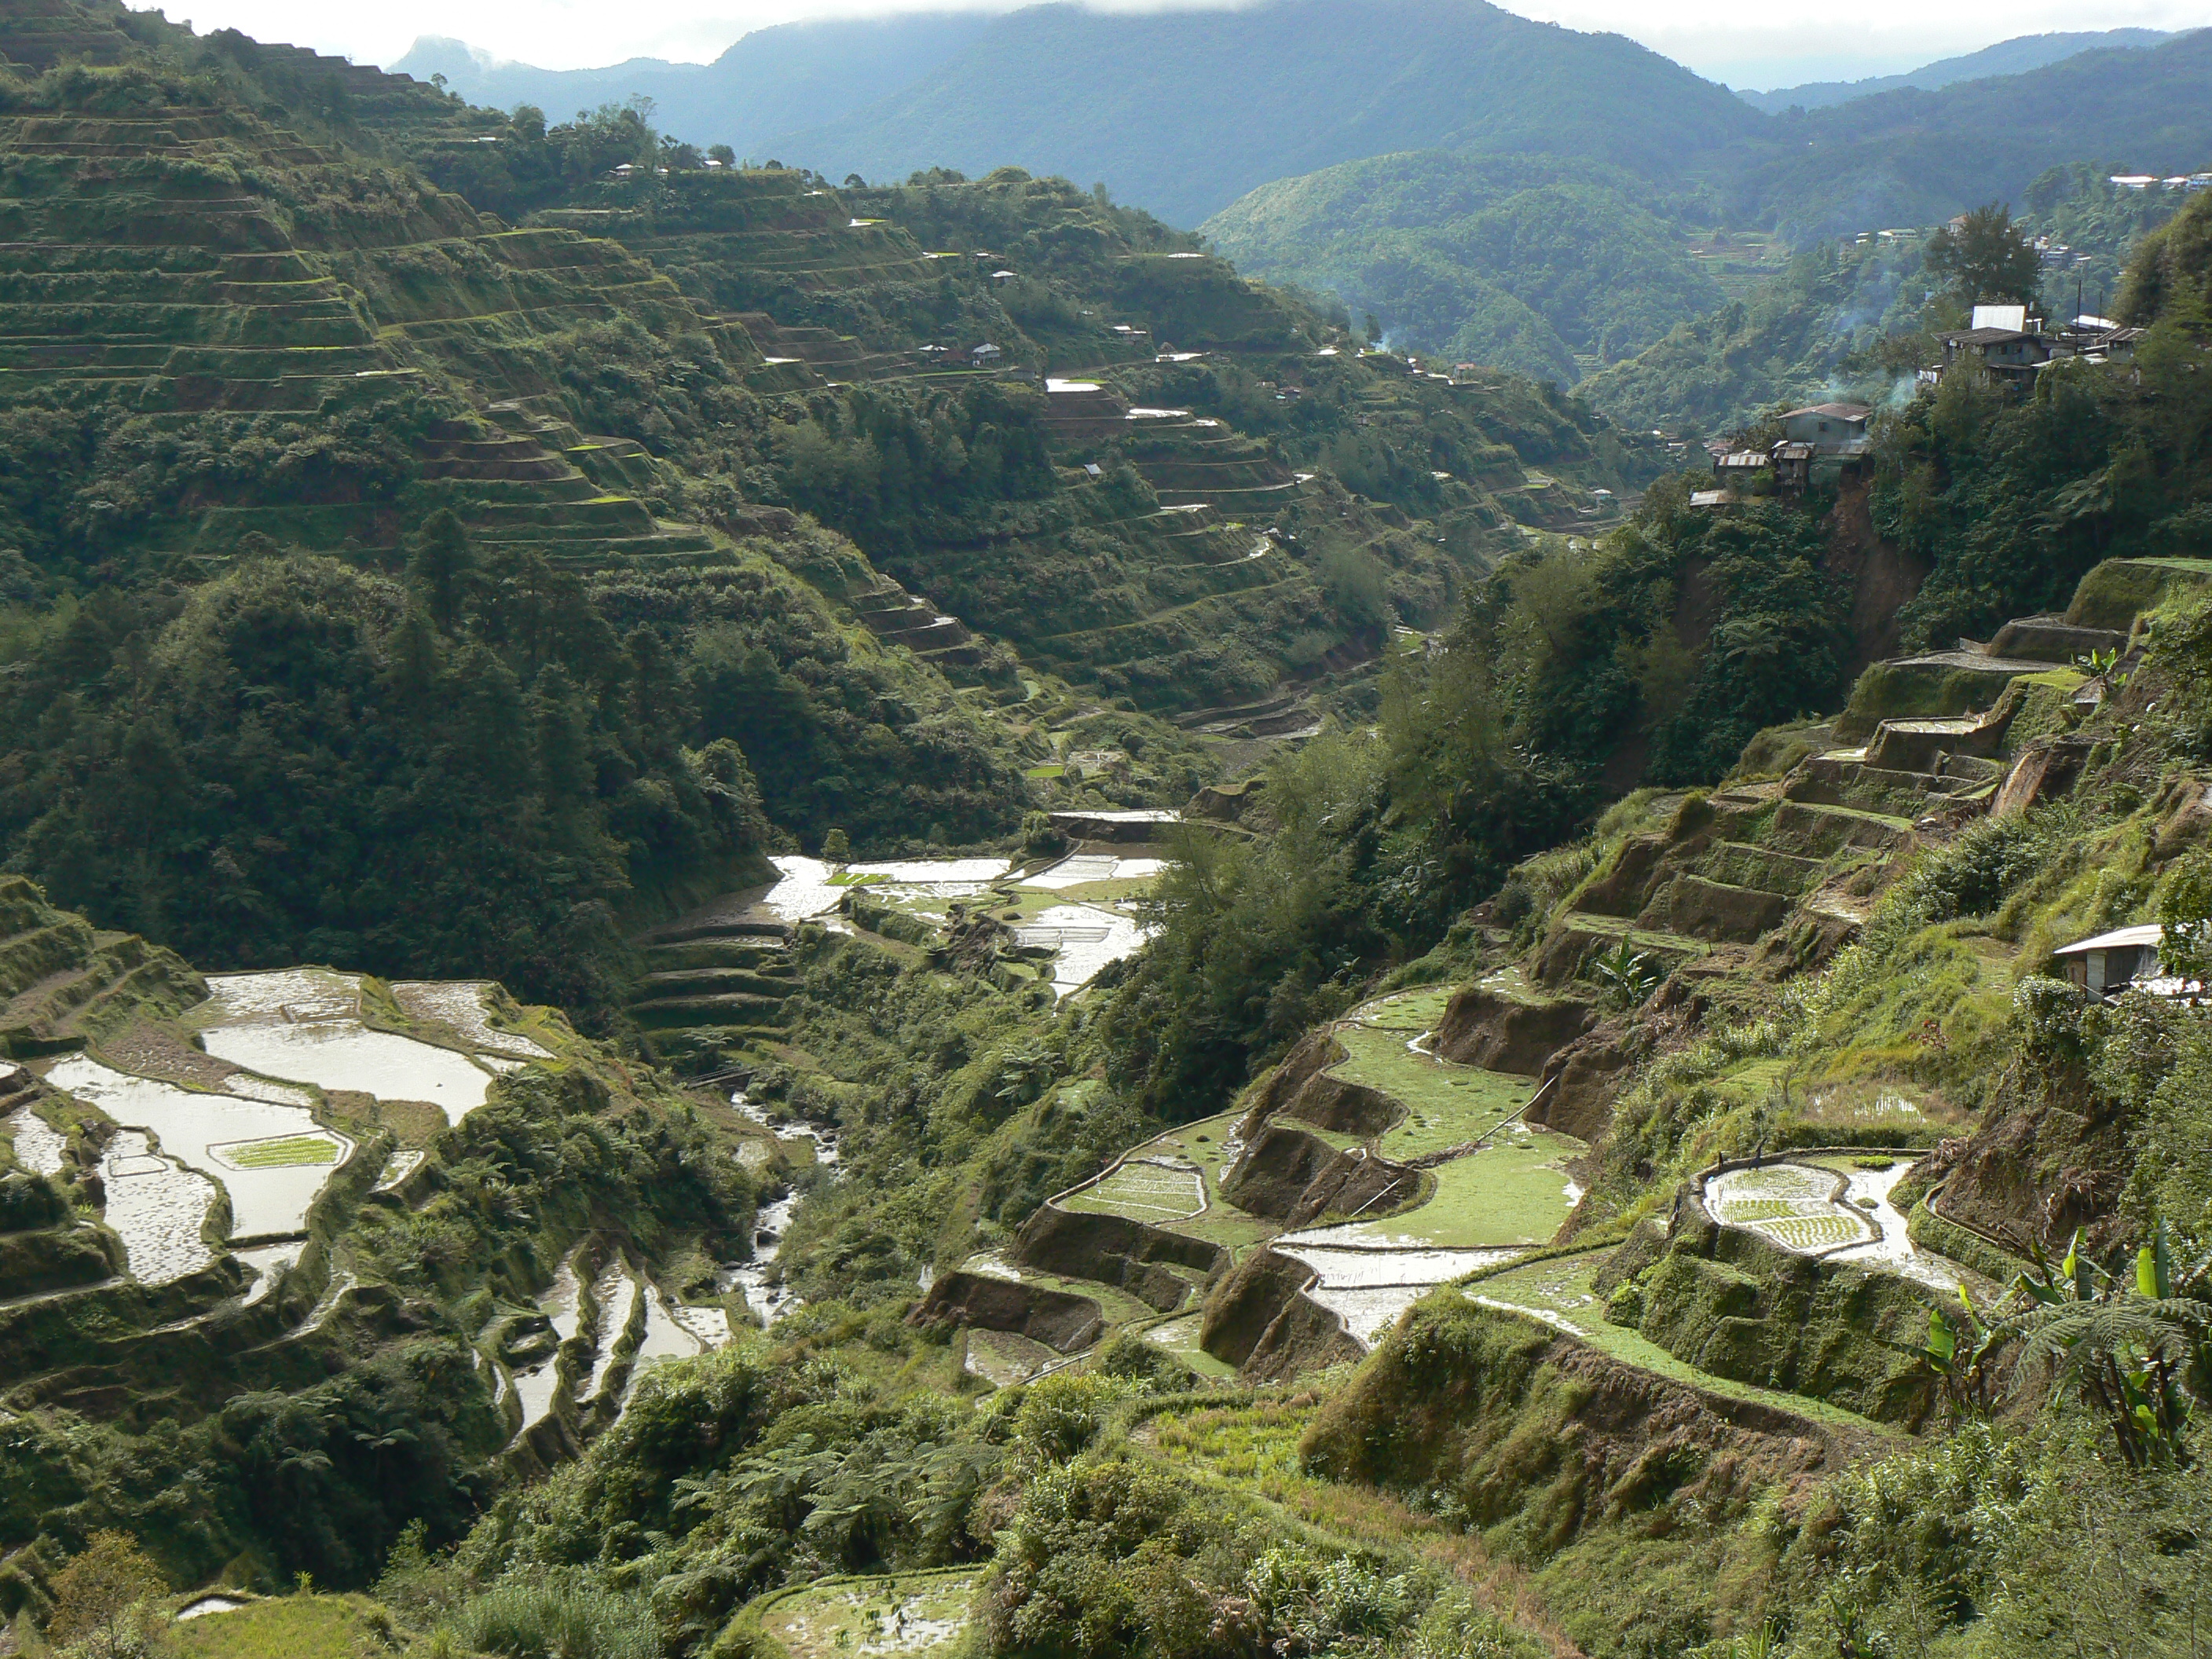 the terraced landscape, recognized as a heritage site.